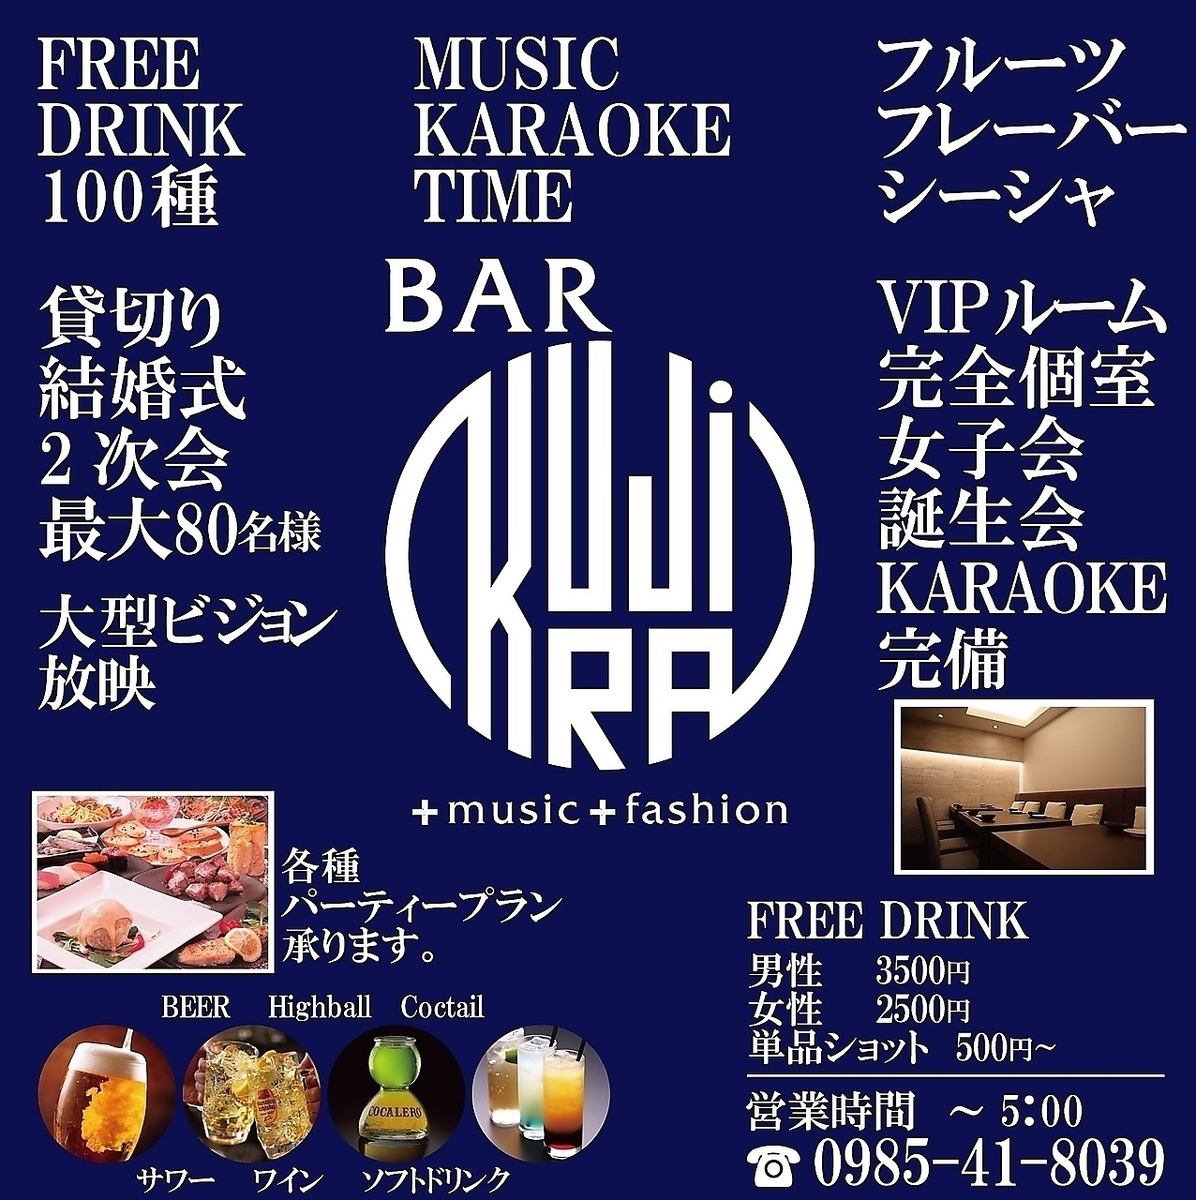 Leave the second party to Bar KUJIRA! Feel free to contact us♪